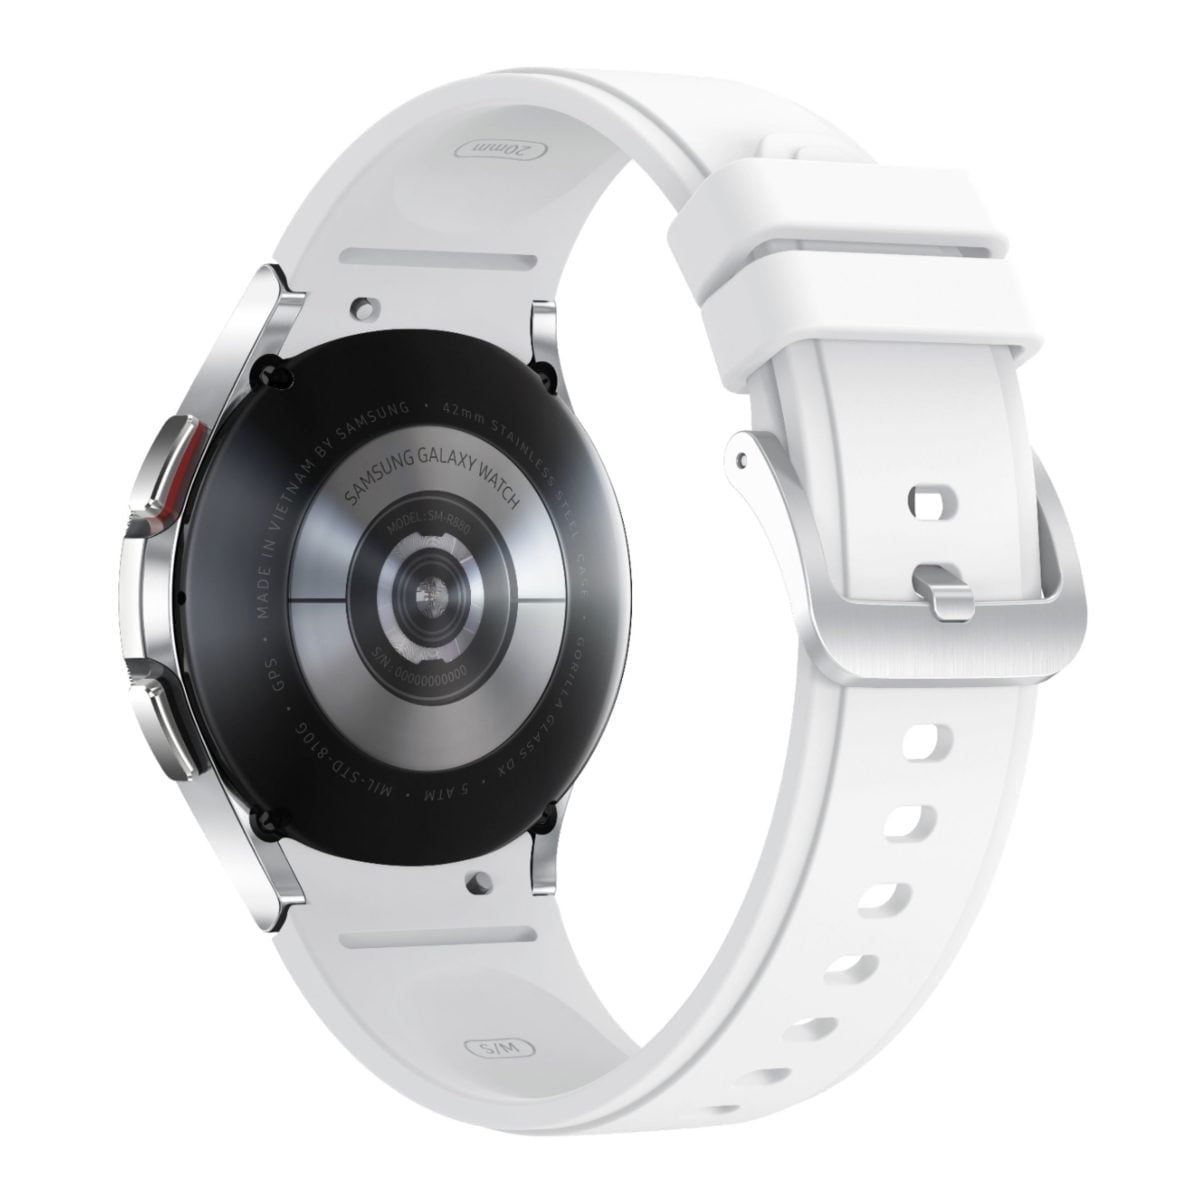 6464603Cv15D 1 Scaled Samsung &Lt;Div Class=&Quot;Sku-Title&Quot;&Gt; &Lt;Div Class=&Quot;Sku-Title&Quot;&Gt; &Lt;H1 Class=&Quot;Heading-5 V-Fw-Regular&Quot;&Gt;Samsung - Galaxy Watch4 Classic Stainless Steel Smartwatch 42Mm Bt - Silver &Lt;Strong&Gt;Model&Lt;/Strong&Gt;:&Lt;Span Class=&Quot;Product-Data-Value Body-Copy&Quot; Style=&Quot;Color: #333333; Font-Size: 16Px;&Quot;&Gt;Sm-R880Nzsaxaa&Lt;/Span&Gt;&Lt;/H1&Gt; &Lt;/Div&Gt; Https://Www.youtube.com/Watch?V=Plte1N8Pl90 &Lt;/Div&Gt; &Lt;Div Class=&Quot;Title-Data Lv &Quot;&Gt; &Lt;Div Class=&Quot;Embedded-Component-Container Lv Product-Description&Quot;&Gt; &Lt;Div Id=&Quot;Shop-Product-Description-93715662&Quot; Class=&Quot;None&Quot; Data-Version=&Quot;1.3.38&Quot;&Gt; &Lt;Div Class=&Quot;Shop-Product-Description&Quot;&Gt;&Lt;Section Class=&Quot;Align-Heading-Left&Quot; Data-Reactroot=&Quot;&Quot;&Gt; &Lt;Div Class=&Quot;Long-Description-Container Body-Copy &Quot;&Gt; &Lt;Div Class=&Quot;Html-Fragment&Quot;&Gt; &Lt;Div&Gt;Your Style. Your Health. Look Good And Feel Great With Your Smart, New Companion, Samsung Galaxy Watch 4 Classic. Make A Stylish Statement With An Iconic Silhouette And Stainless-Steel Casing, While Your Watch Keeps You In Tune With Your Health And Pushes You To Go Further. Make The Most Of Every Run With Advanced Coaching And Oxygen-Level Monitoring¹ That Help You Exercise Smarter While Increasing Endurance. Leave Your Phone Behind While Staying Connected — Call, Text And Stream Music,All From Your Wrist With Lte Connectivity. Galaxy Watch4 Classic Is Health Evolved. 1Accurate Vo2 Max Reading Requires Running Outdoors For At Least 20 Minutes With Gps On; Consult User Manual Before Use. ¹The Vo2 Max Software Functions Are Not Intended For Use In The Diagnosis Of Disease Or Other Conditions, Or In The Cure, Mitigation, Treatment Or Prevention Of Disease.&Lt;/Div&Gt; &Lt;Div&Gt;&Lt;/Div&Gt; &Lt;Div&Gt;&Lt;/Div&Gt; &Lt;/Div&Gt; &Lt;/Div&Gt; &Lt;/Section&Gt;&Lt;/Div&Gt; &Lt;/Div&Gt; &Lt;/Div&Gt; &Lt;/Div&Gt; Samsung Galaxy Watch4 Classic Samsung Galaxy Watch4 Classic Stainless Steel Smartwatch 42Mm Bt - Silver